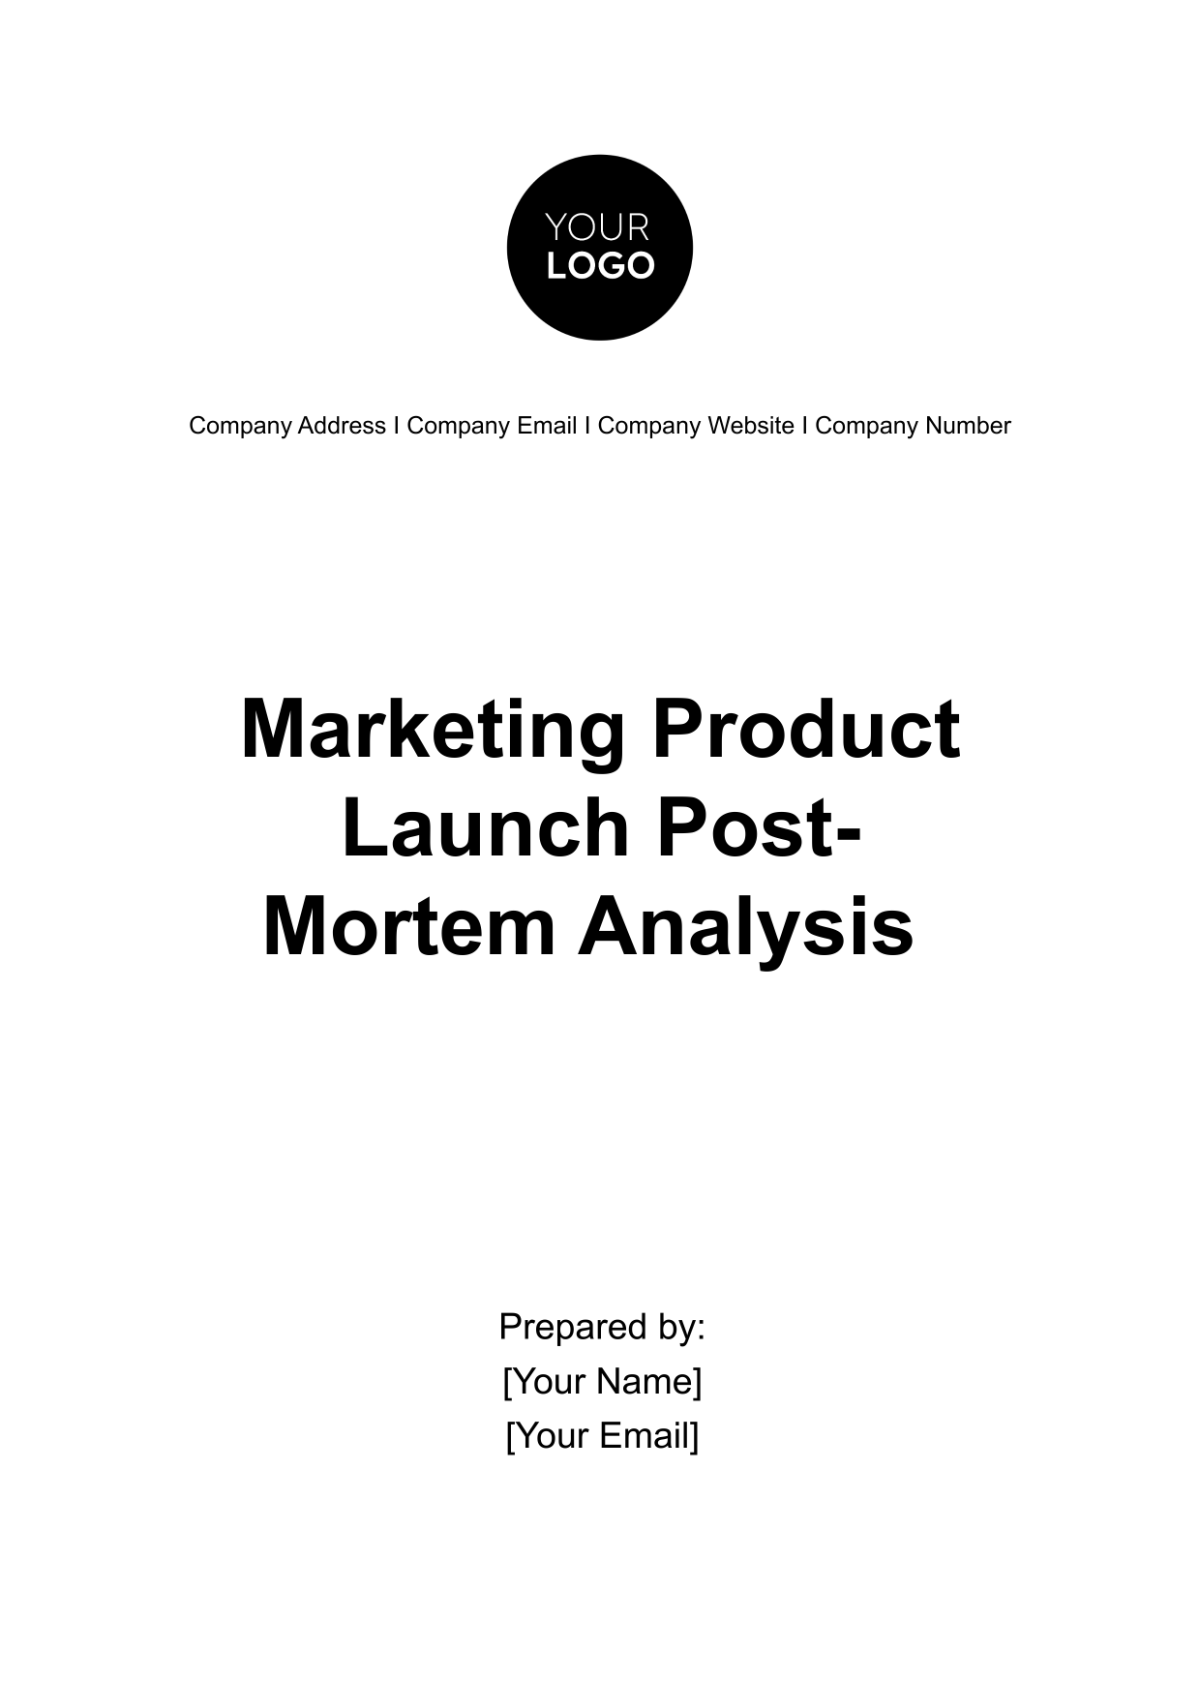 Marketing Product Launch Post-Mortem Analysis Template